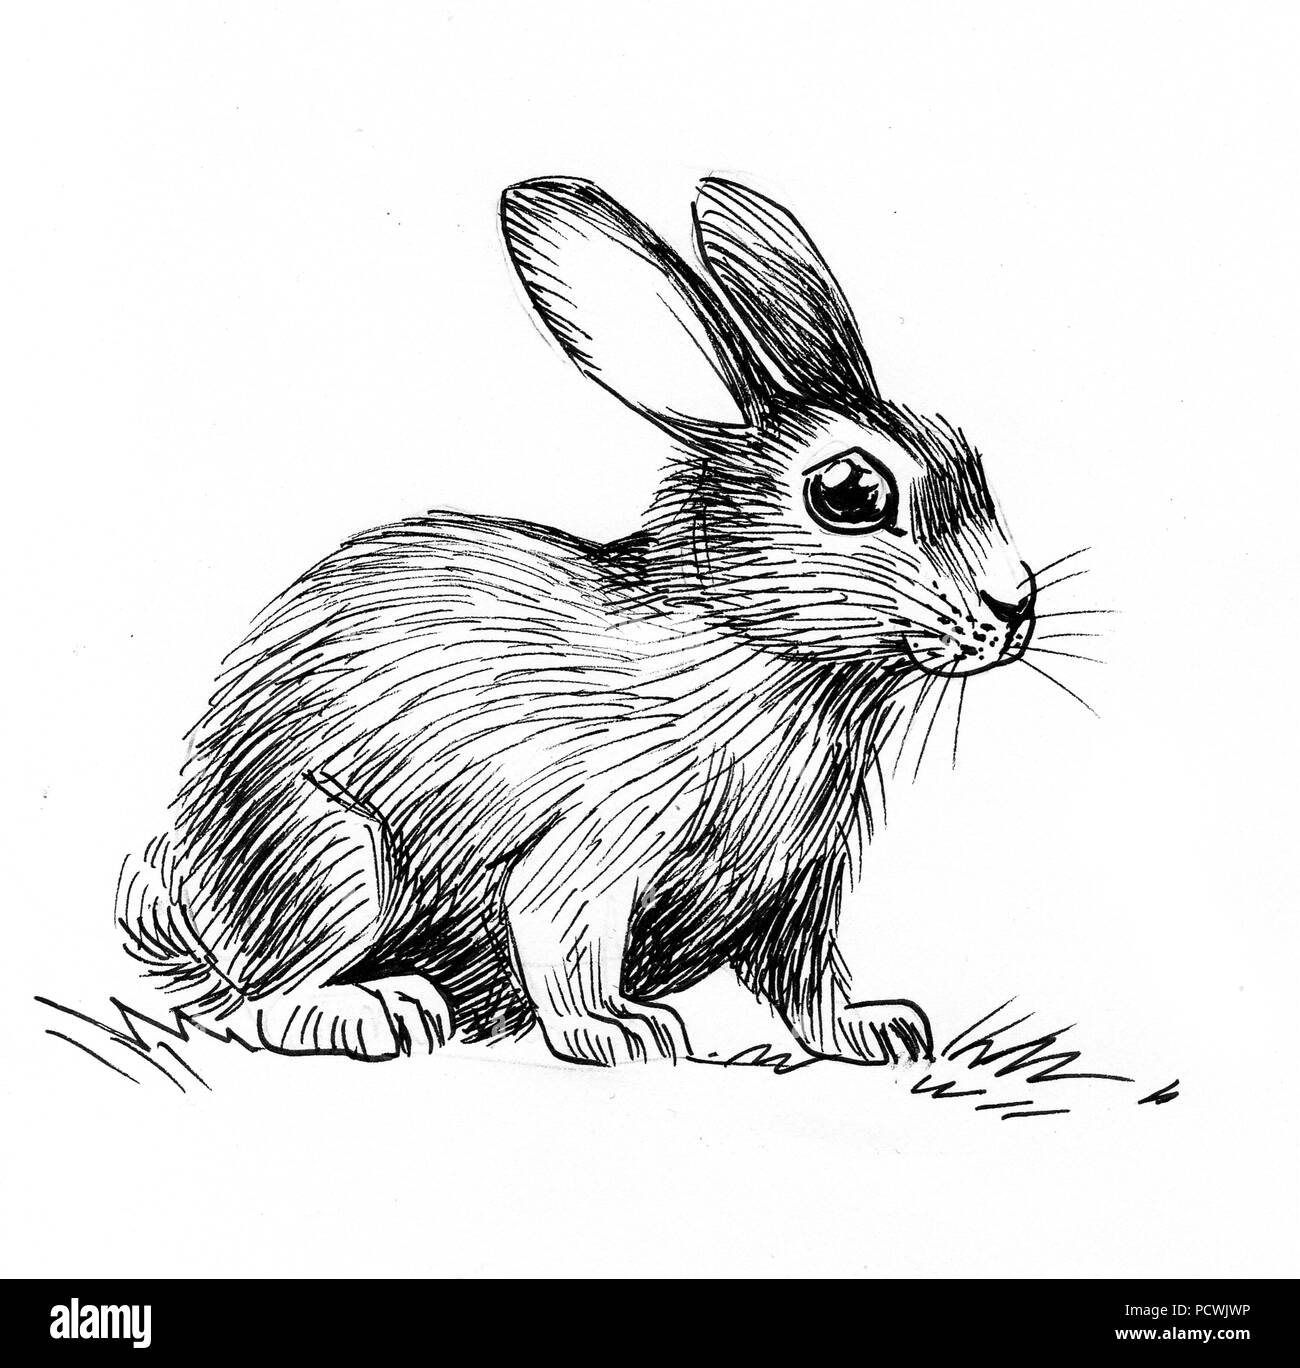 How to Draw a Rabbit - Really Easy Drawing Tutorial